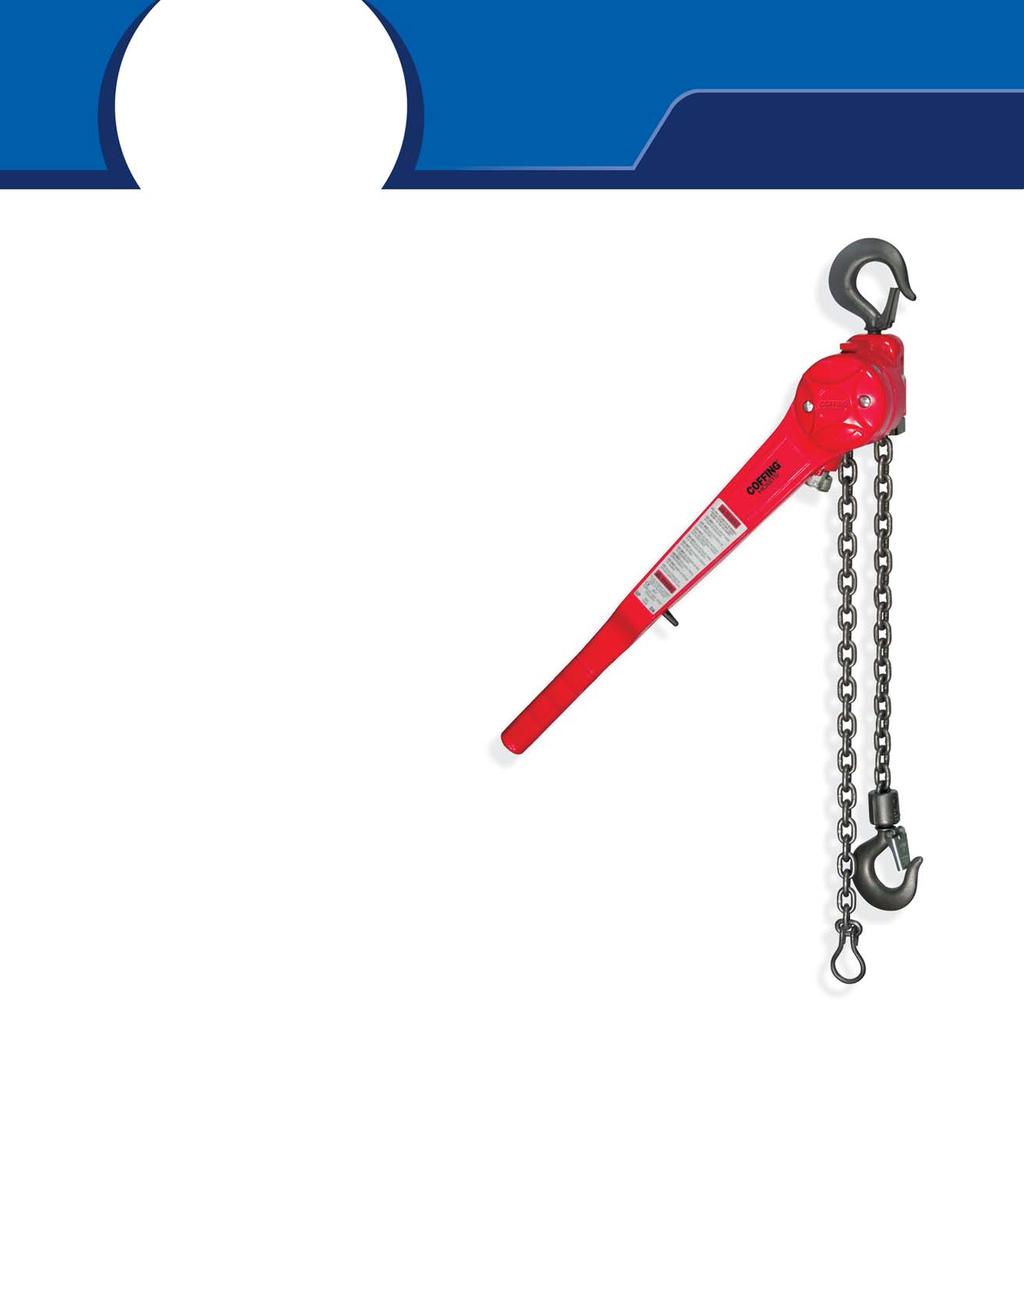 The Lifting Professionals MODEL MAV / MALV LONG HANDLE LEVER HOIST Easy Operation, Heavy-Duty Construction For heavy-duty pulling, stretching, or lifting in construction or industrial settings, the